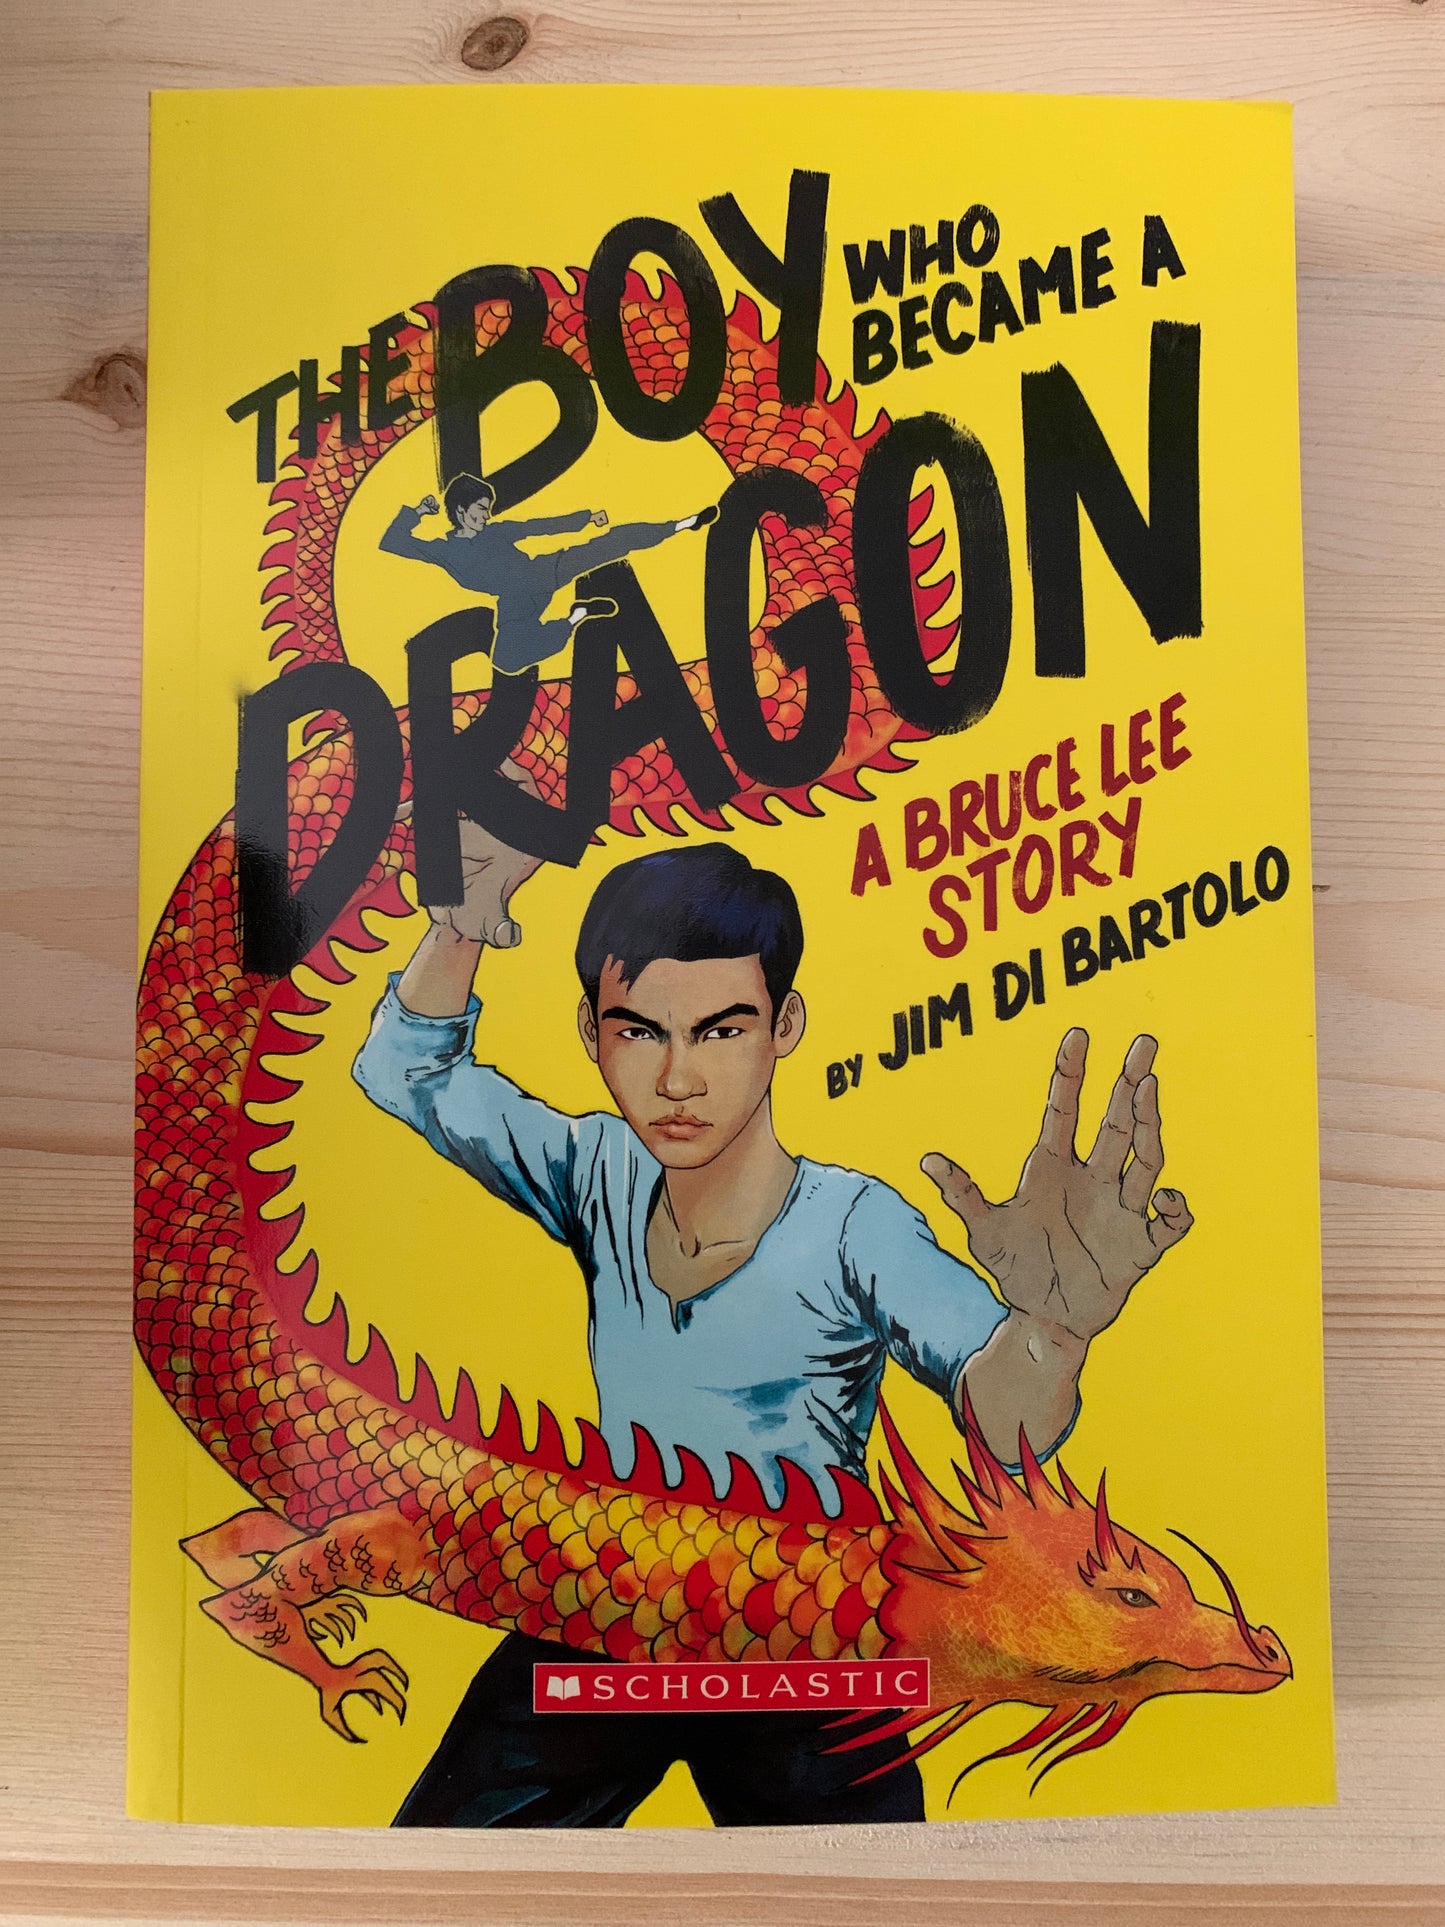 The Boy Who Became a Dragon: a Bruce Lee Story